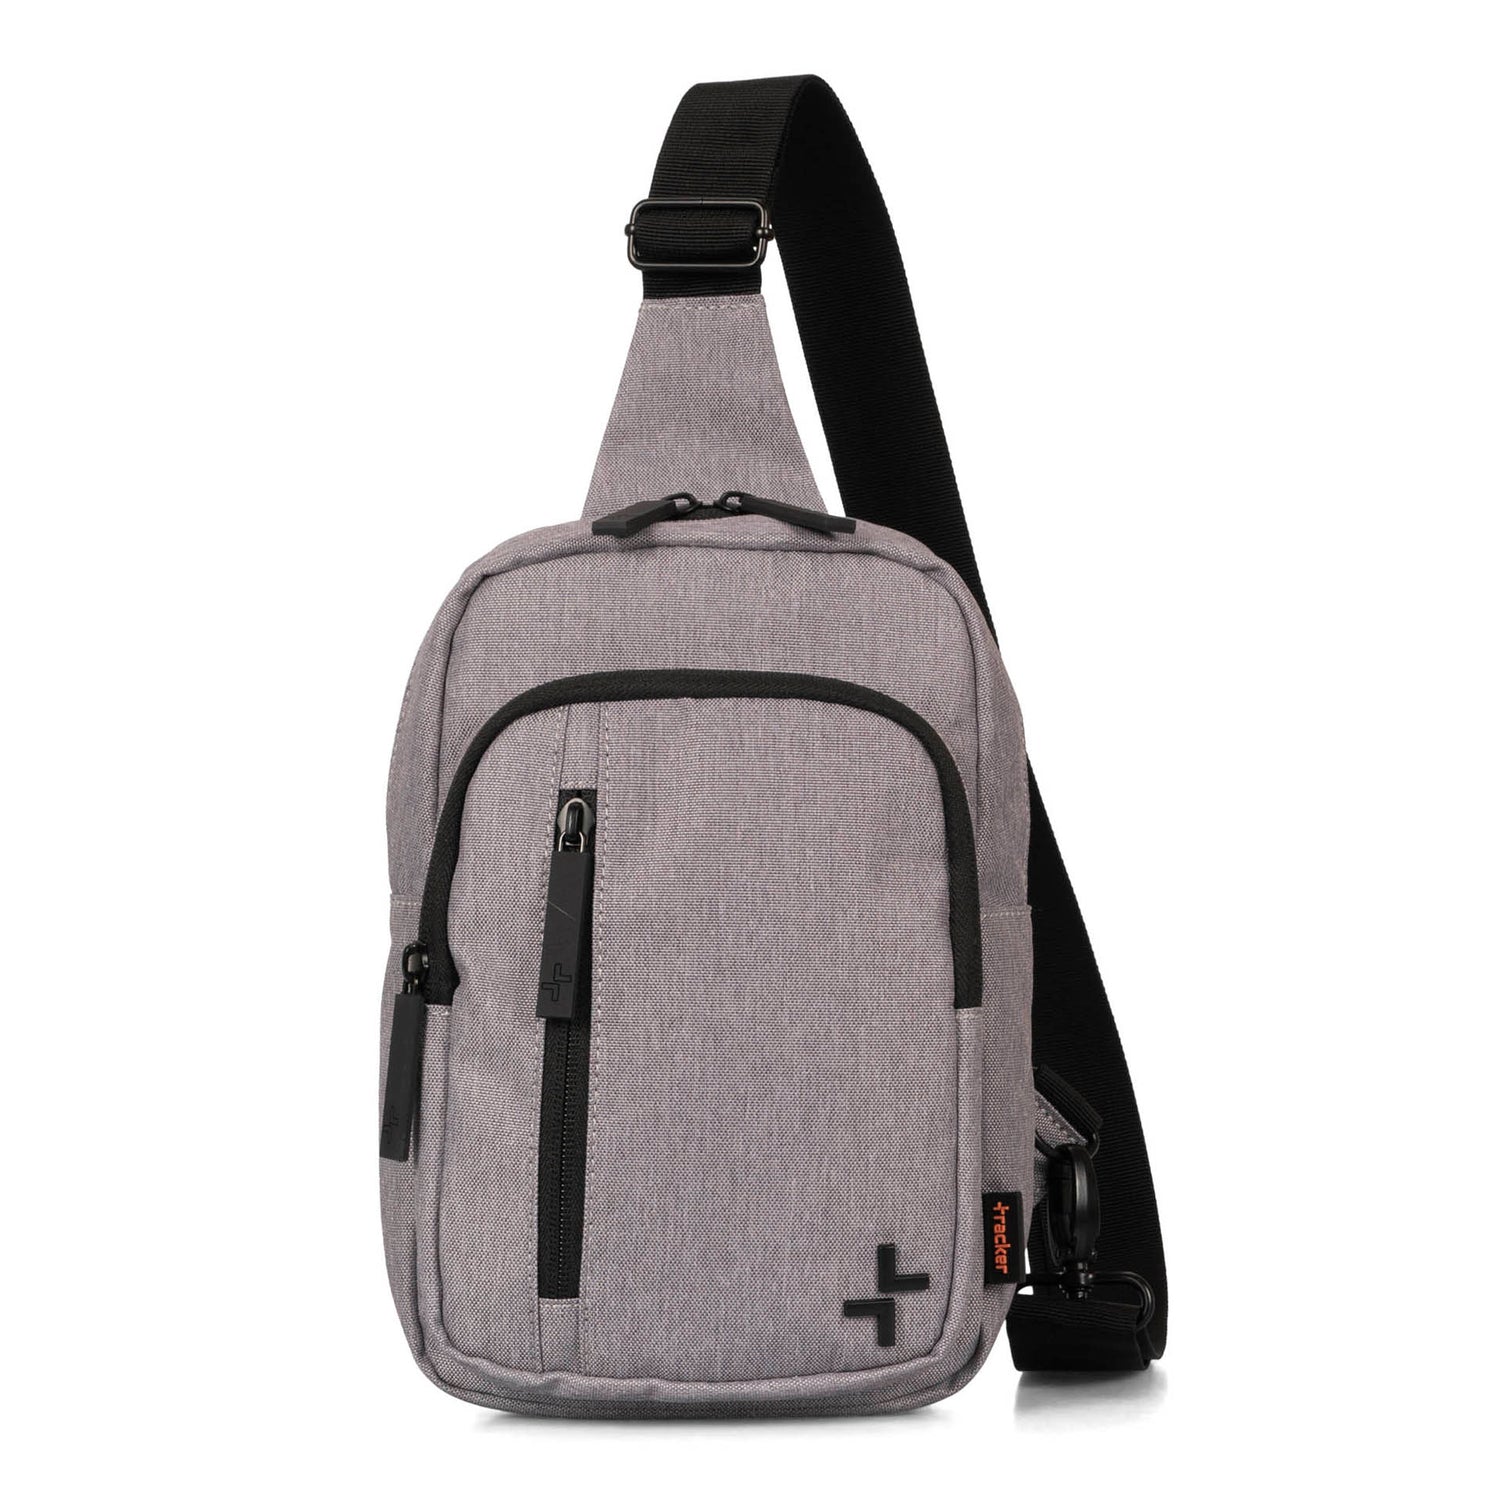 Front side of a grey sling bag called Nelson designed by Tracker showing its textured polyester, 2 front zipper pockets, the tracker logo, and sling strap.